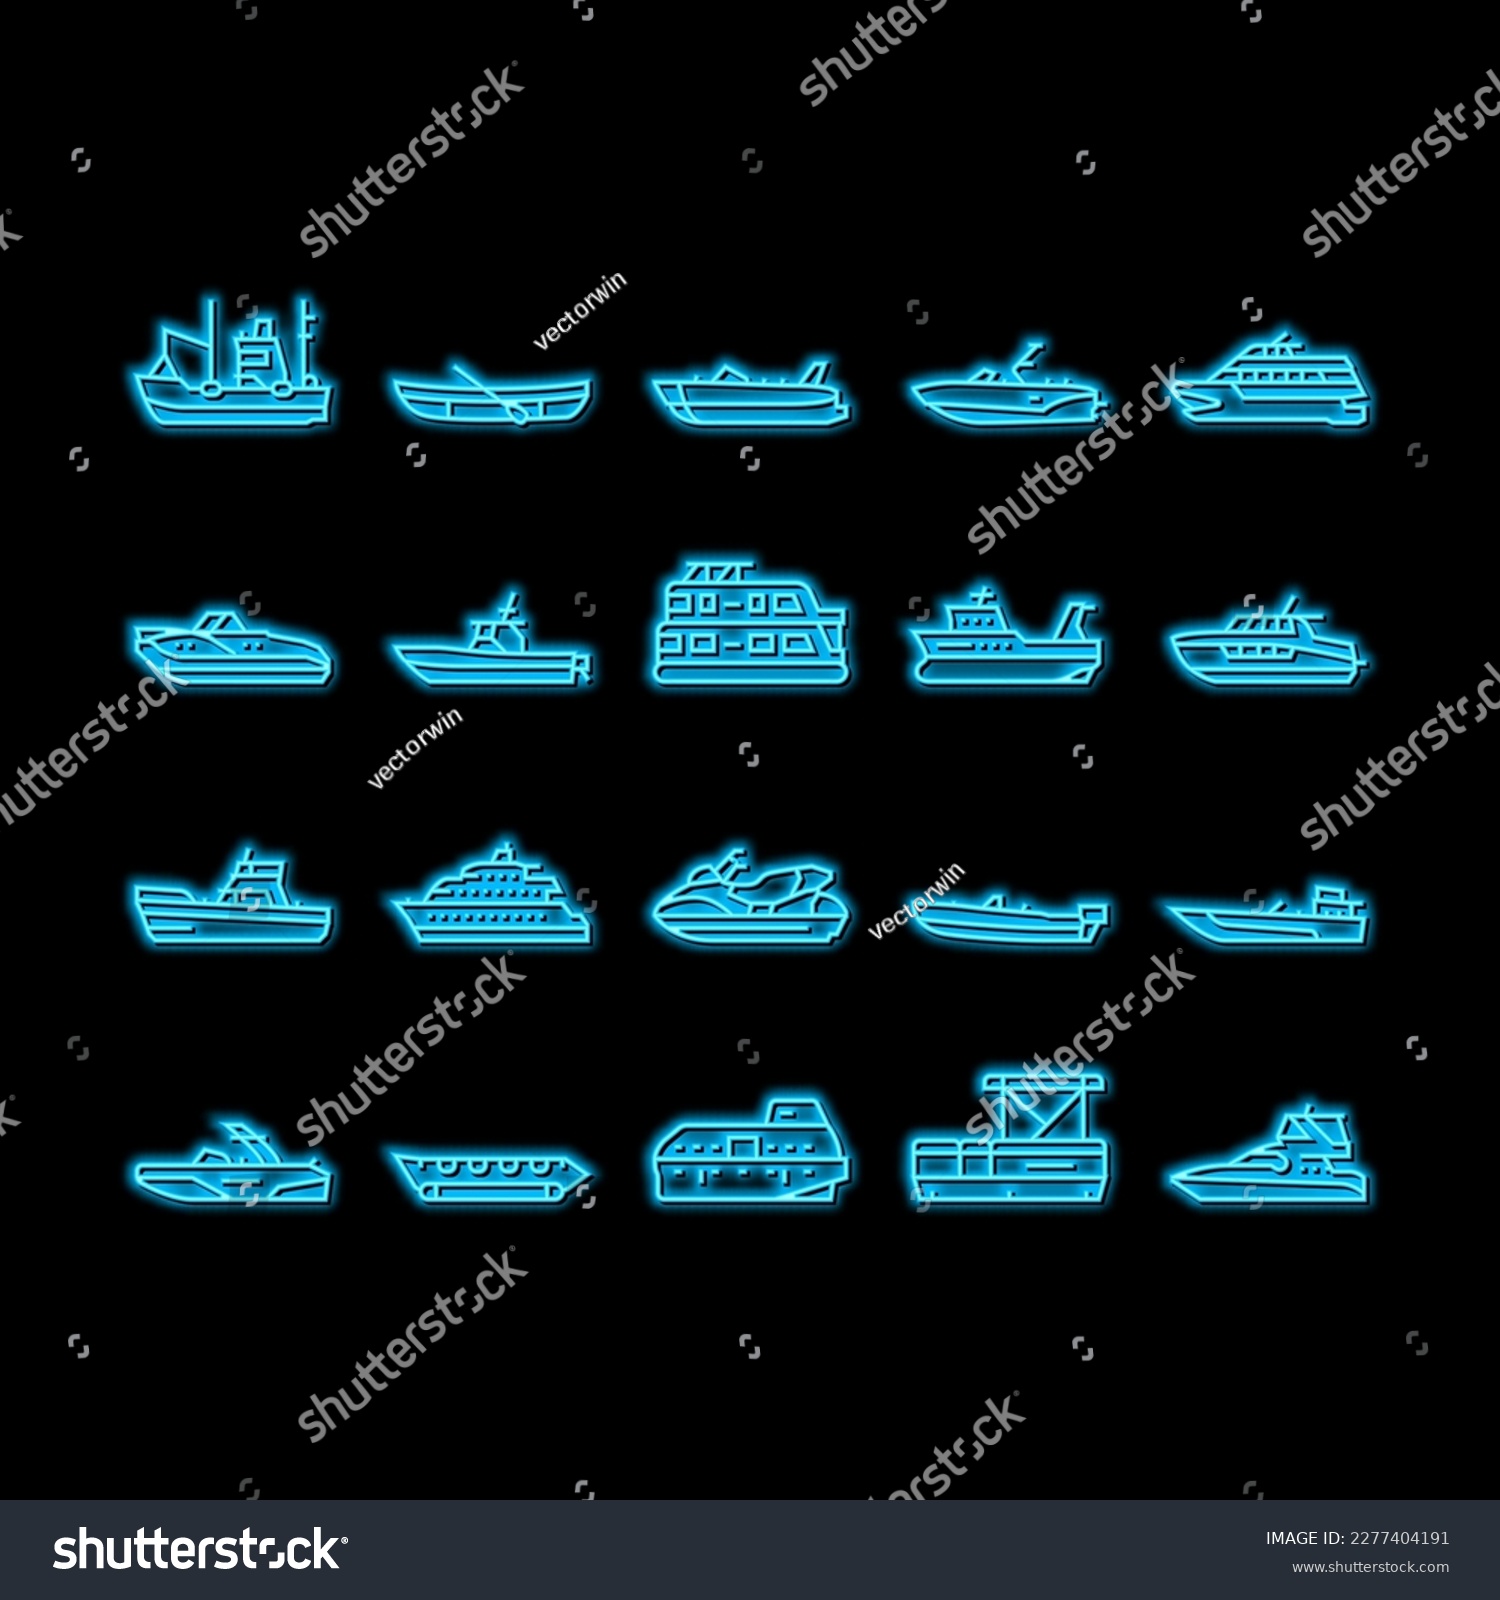 SVG of Boat Water Transportation Types neon light sign vector. Runabout And Catamaran, Fishing And Bowrider, Motor Yacht And Cabin Cruiser Boat Line. Ship And Motorboat Transport Illustrations svg